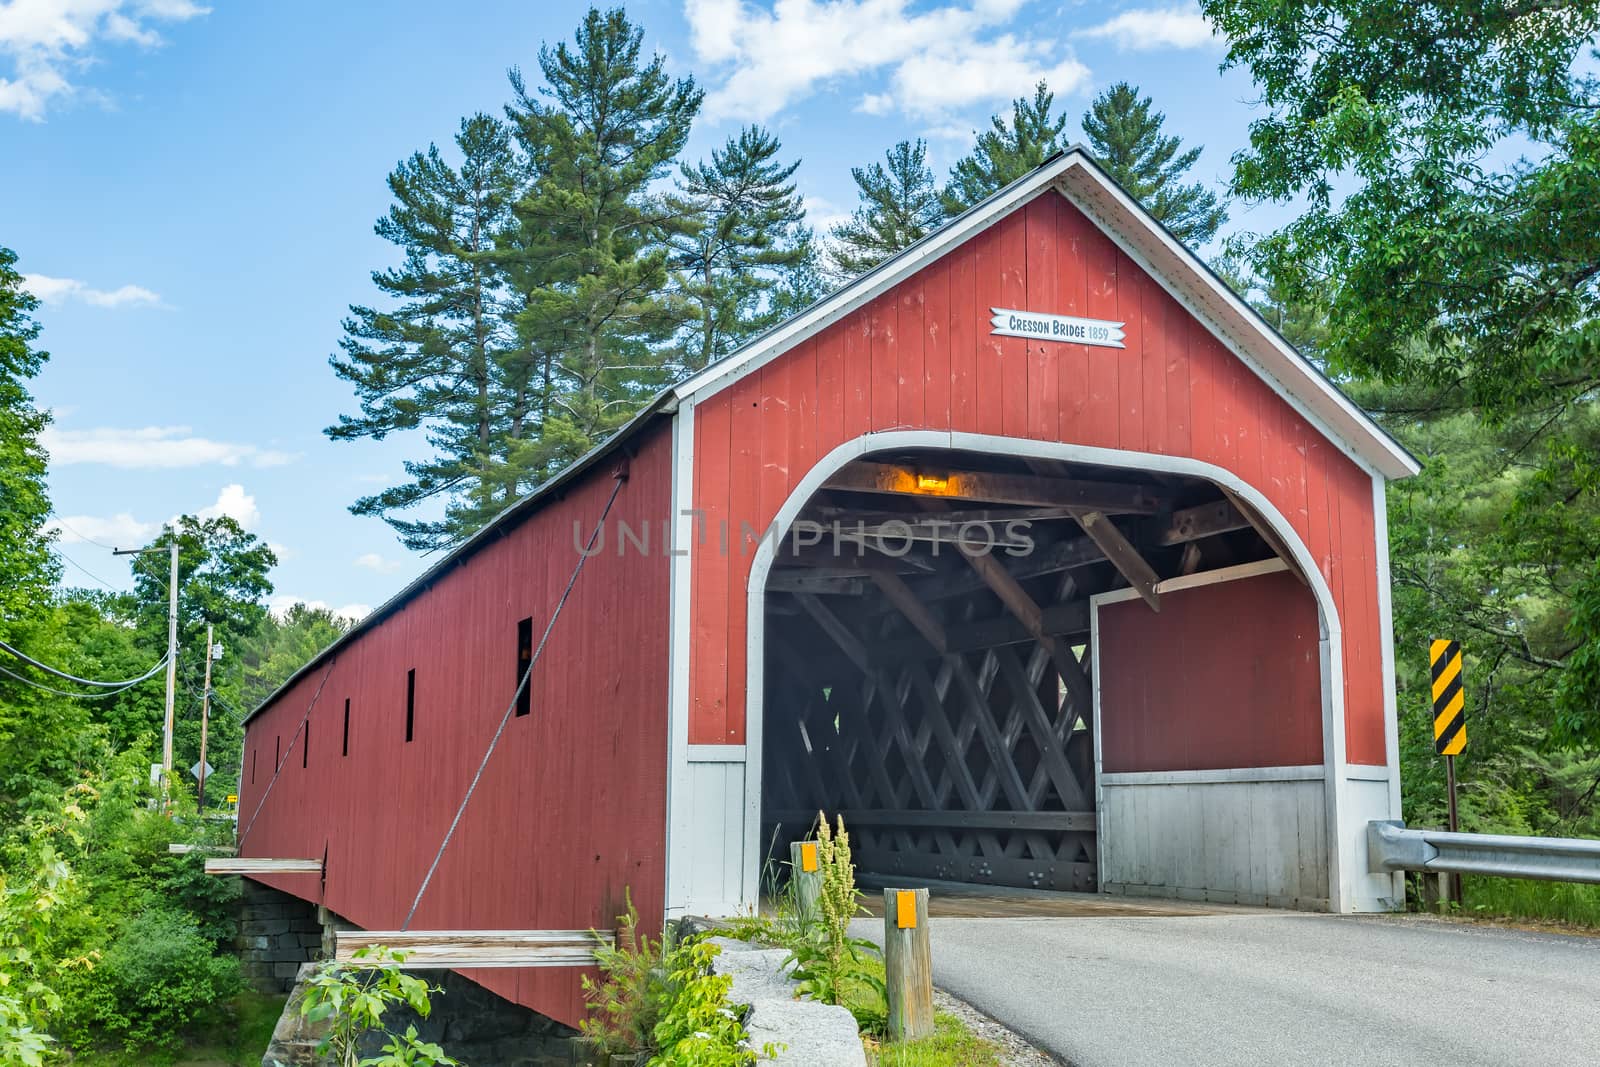 The Sawyers Crossing Covered Bridge, also known as the Cresson Bridge, is a wooden covered bridge carrying Sawyers Crossing Road over the Ashuelot River in northern Swanzey, New Hampshire.